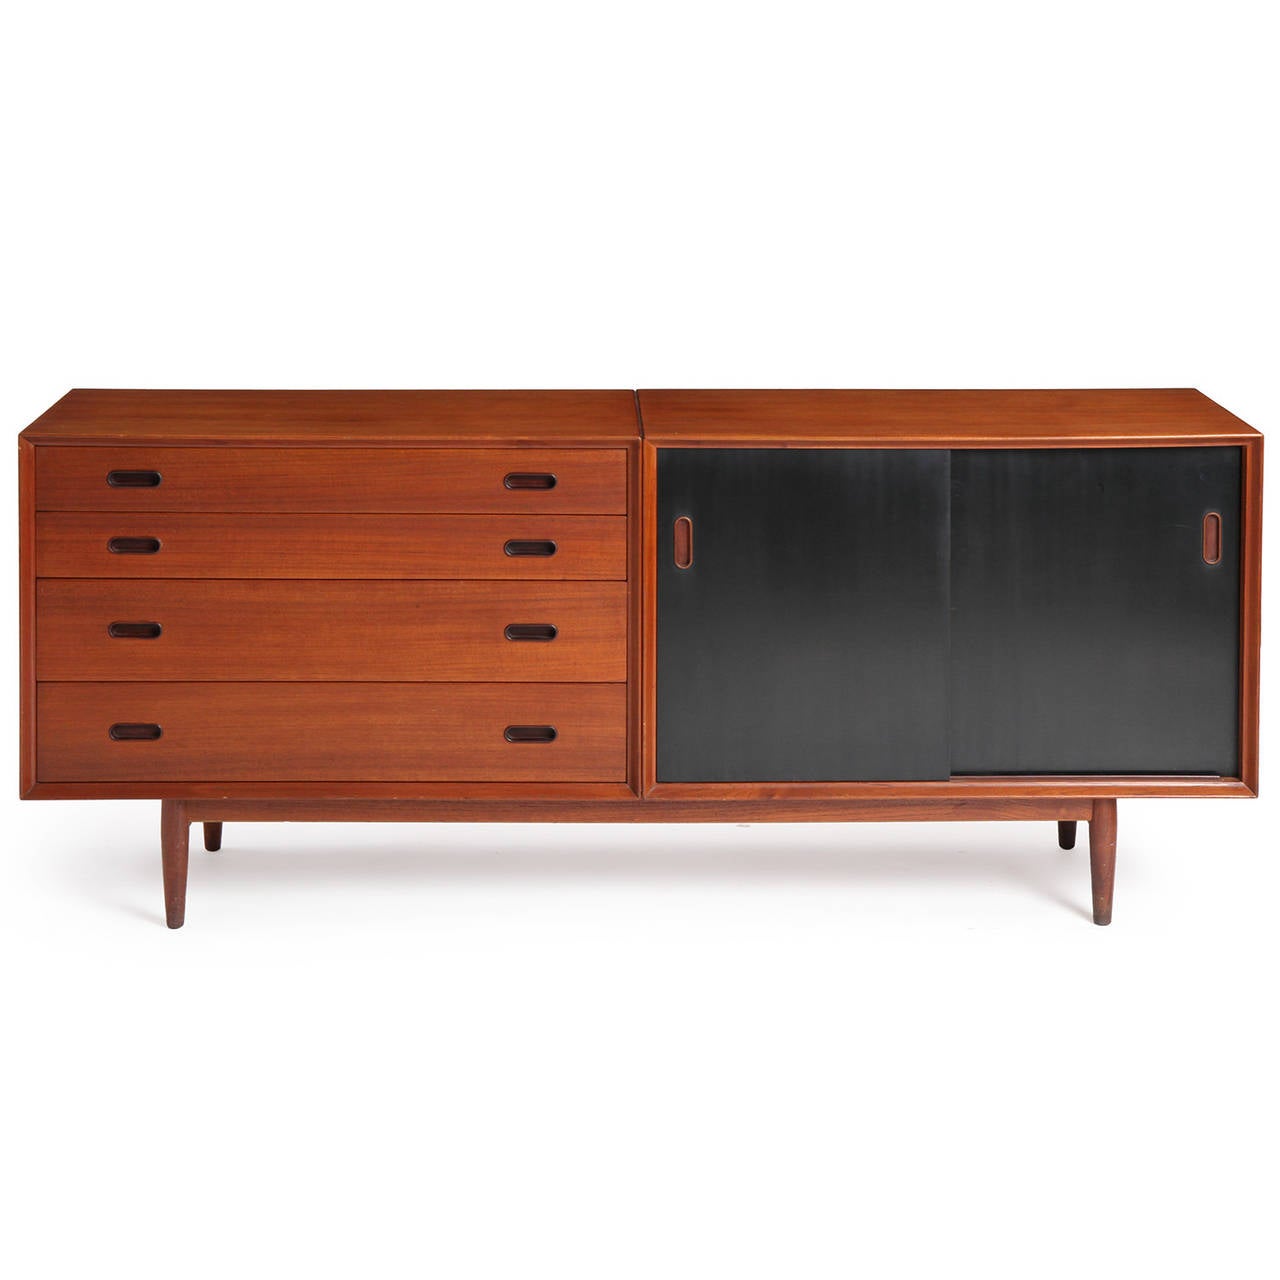 A refined and elegant credenza or sideboard having two distinct conjoined sections cantilevered over an architectural base: a cabinet with two reversible lacquered sliding doors (the other side being natural teak); the other section having a bank of